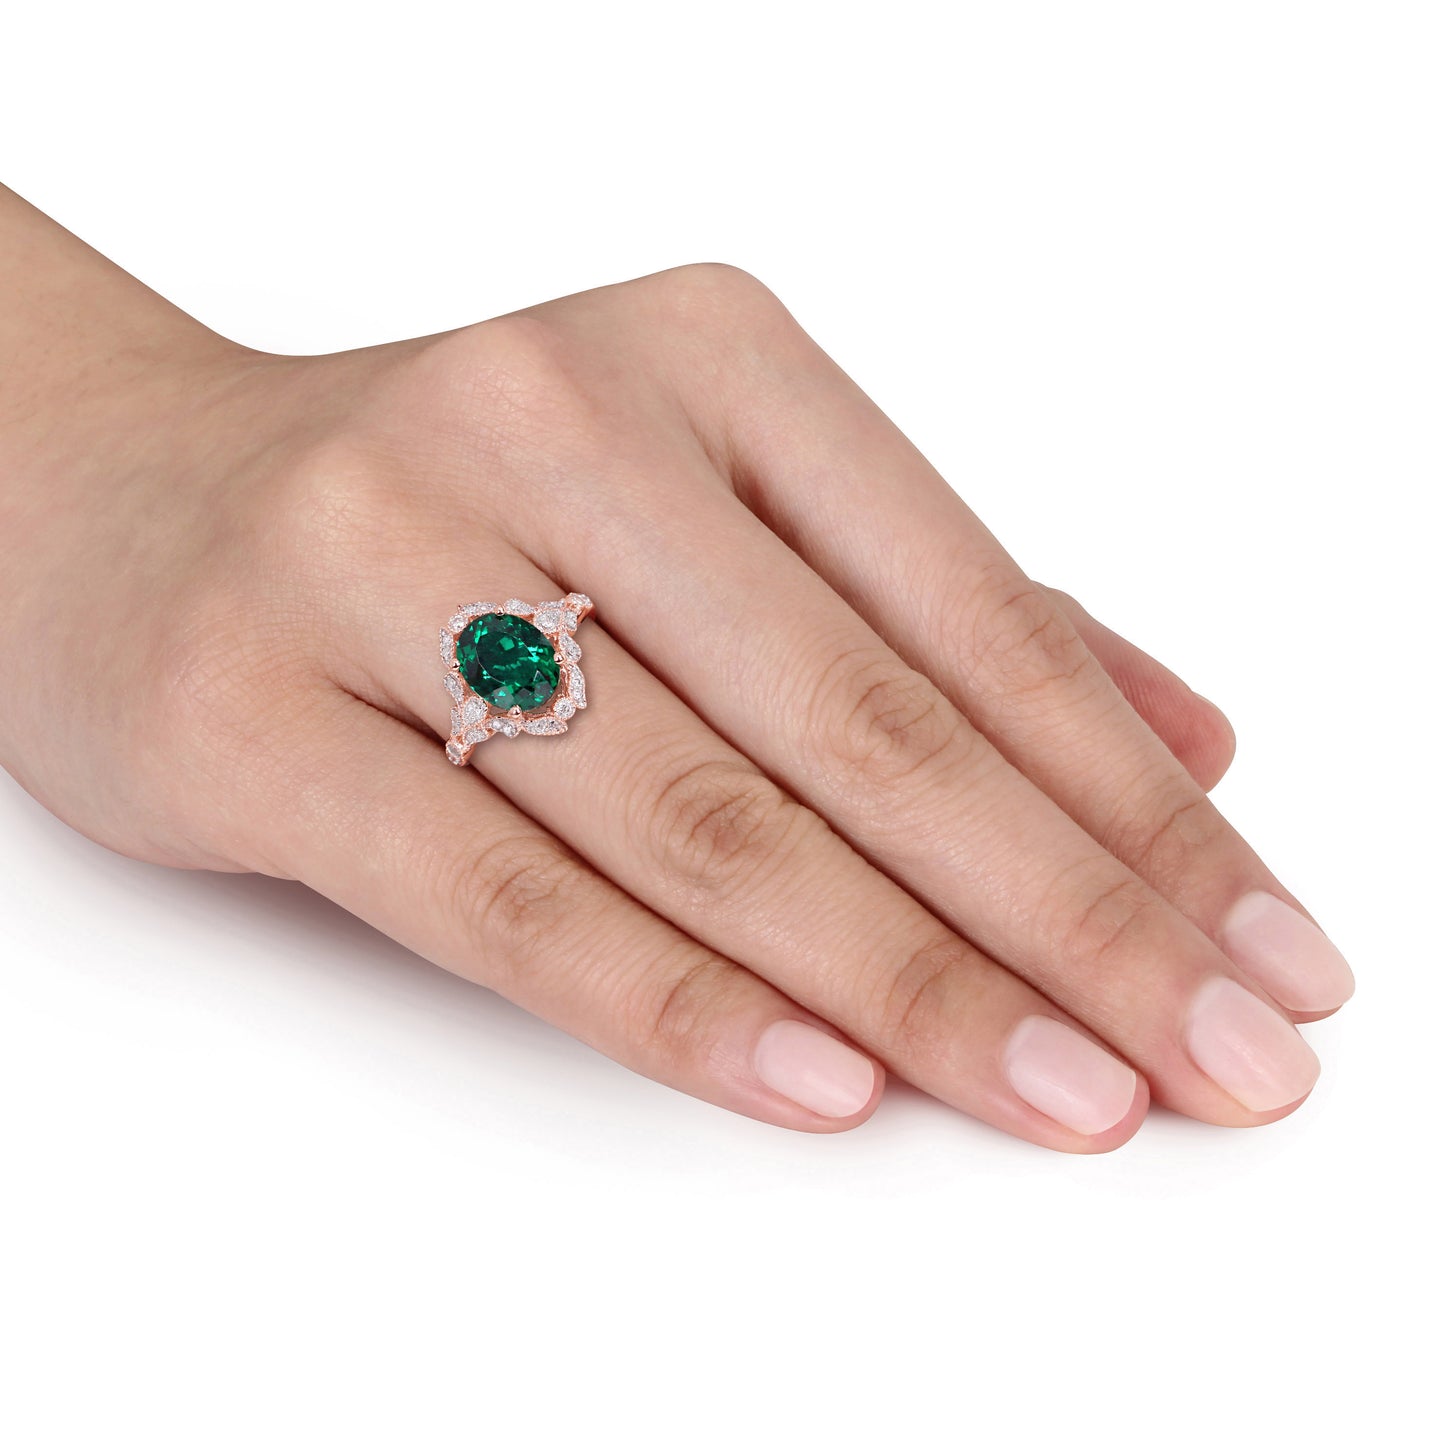 Oval Cut Created Emerald & Diamond Ring in 10k Rose Gold